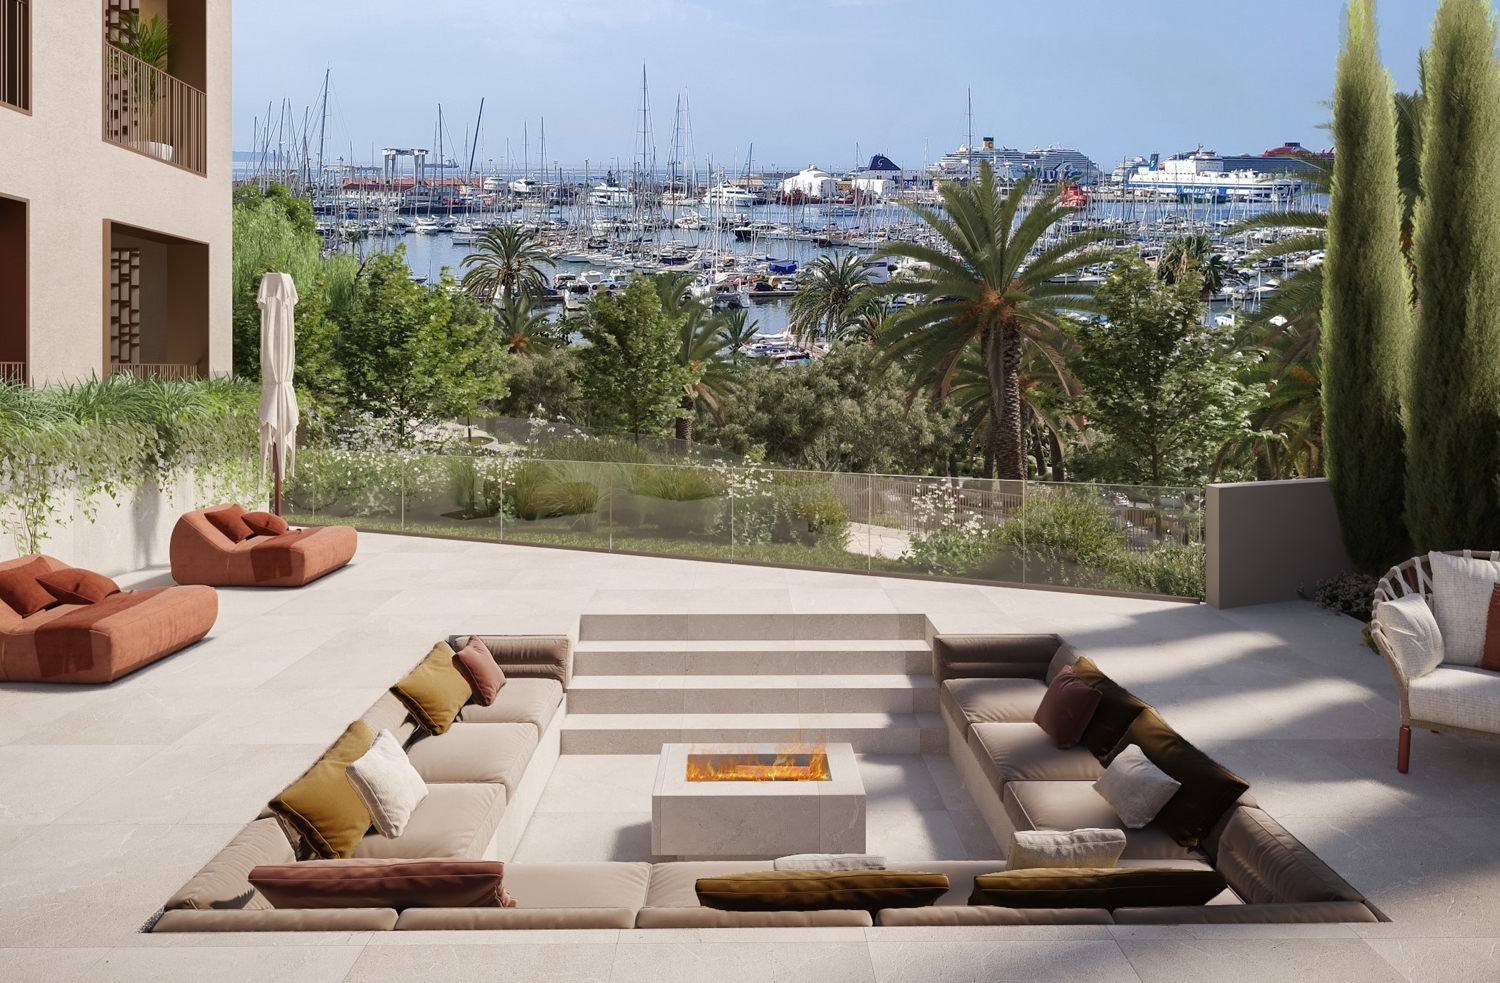 Penthouse with pool: New development in Santa Catalina